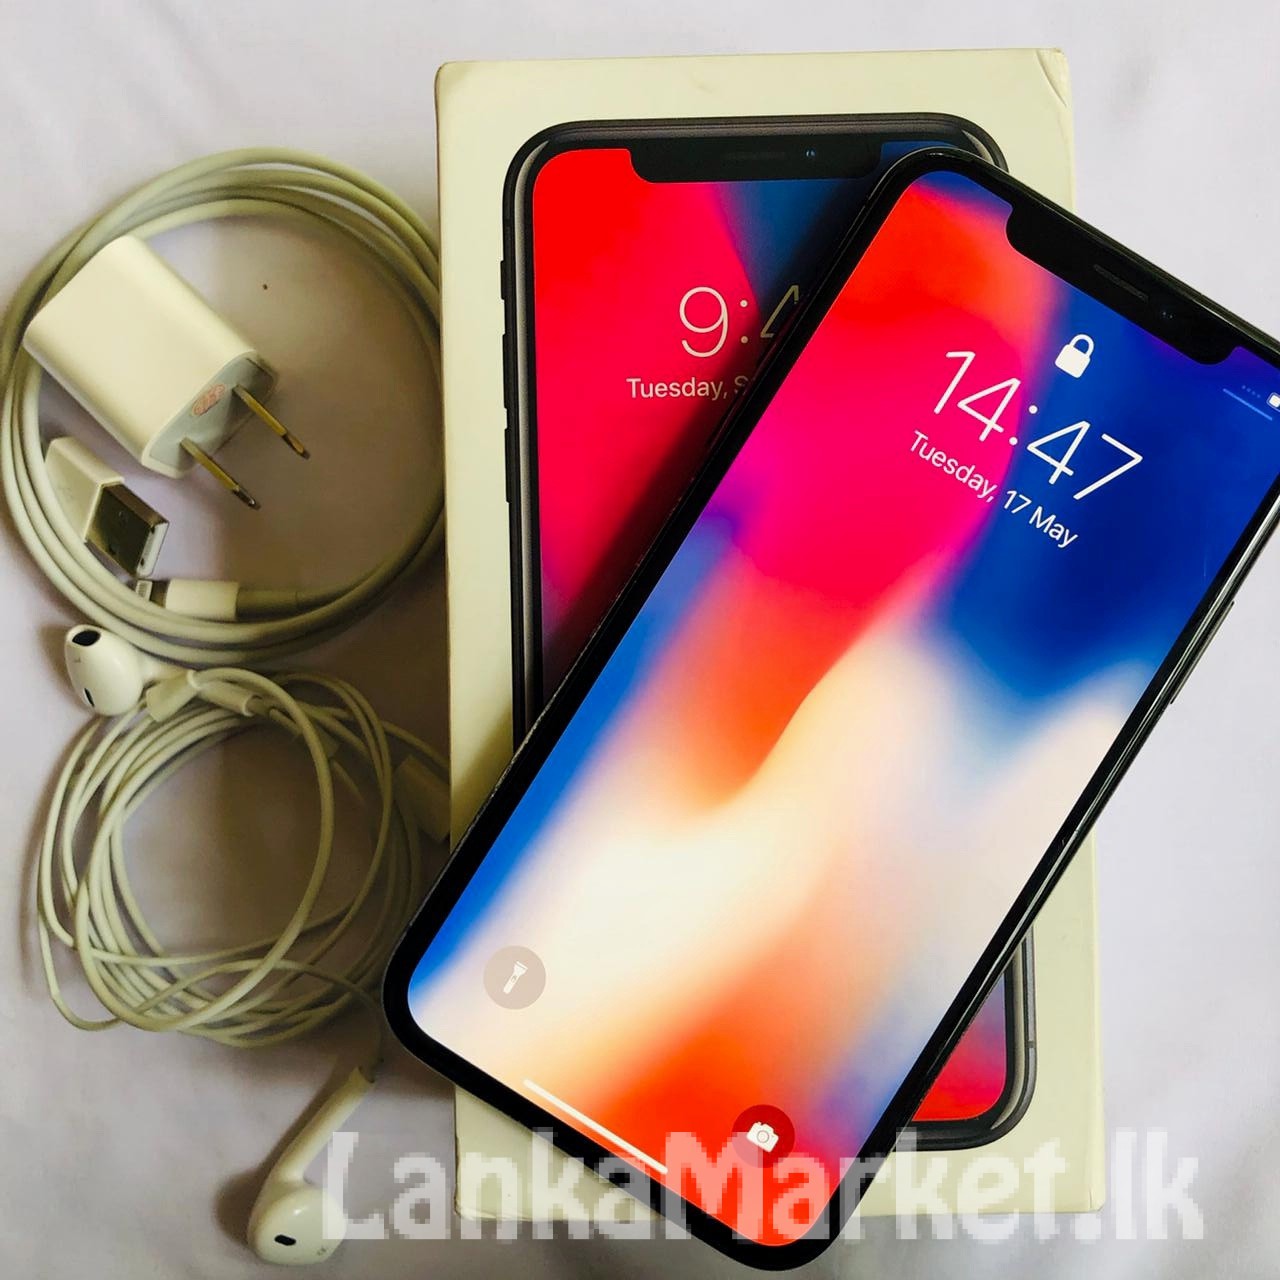 Apple iPhone X 256GB for sale